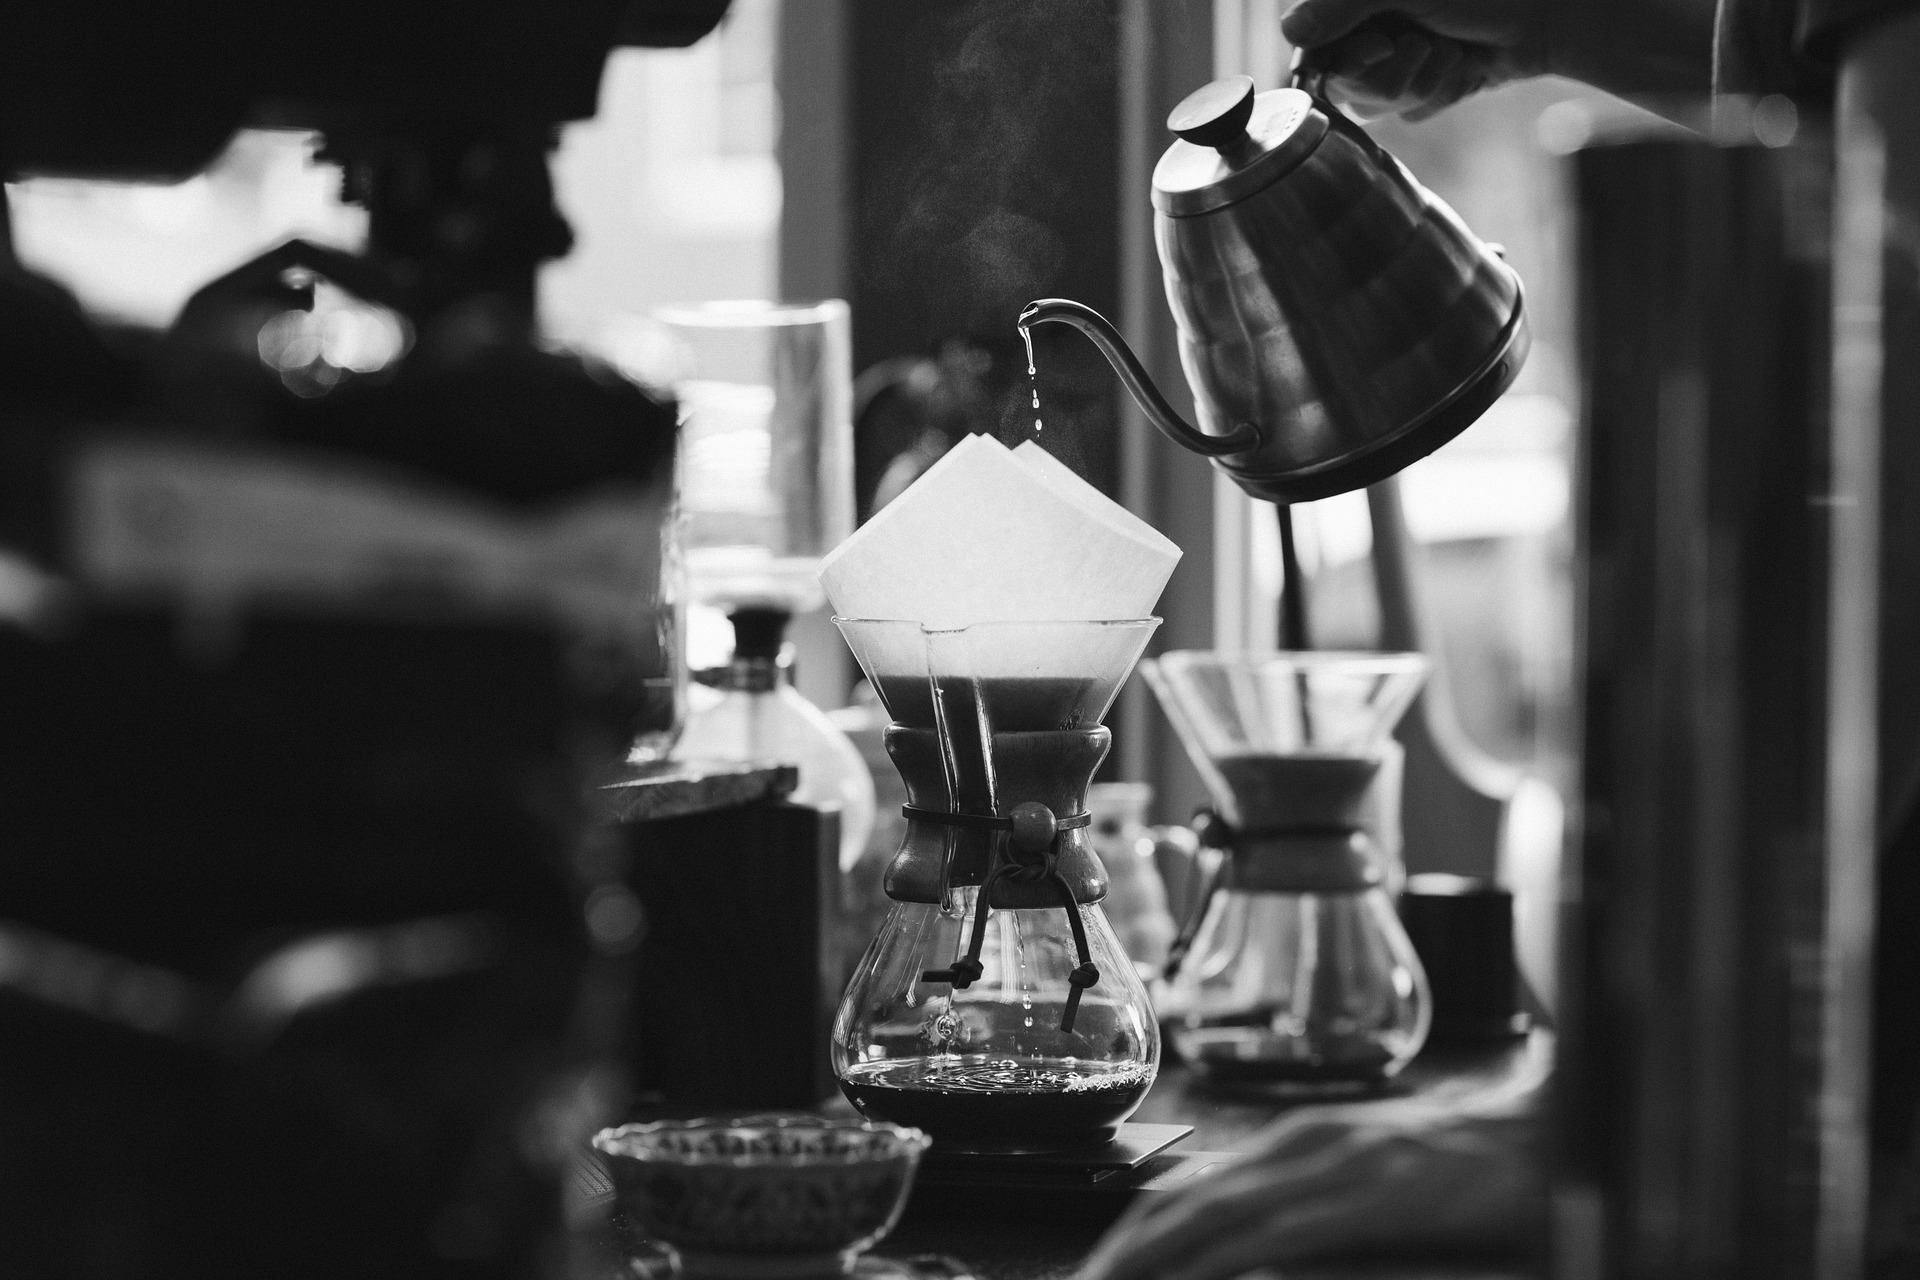 A barista pours water over ground coffee in a Chemex on a cafe bar